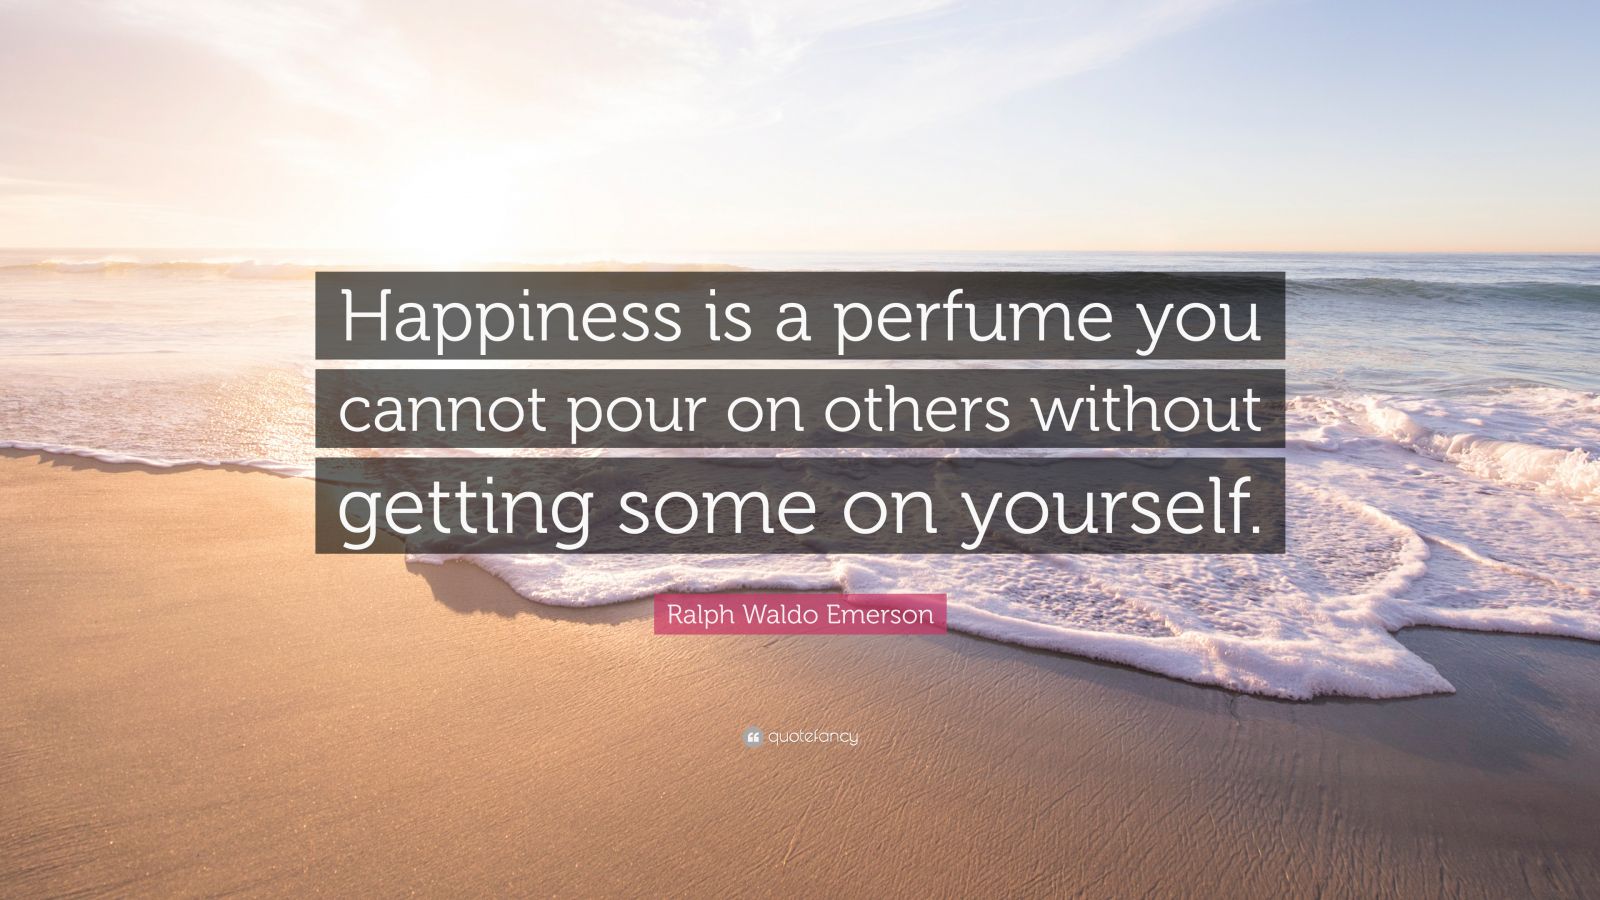 Ralph Waldo Emerson Quote: “Happiness is a perfume you cannot pour on ...